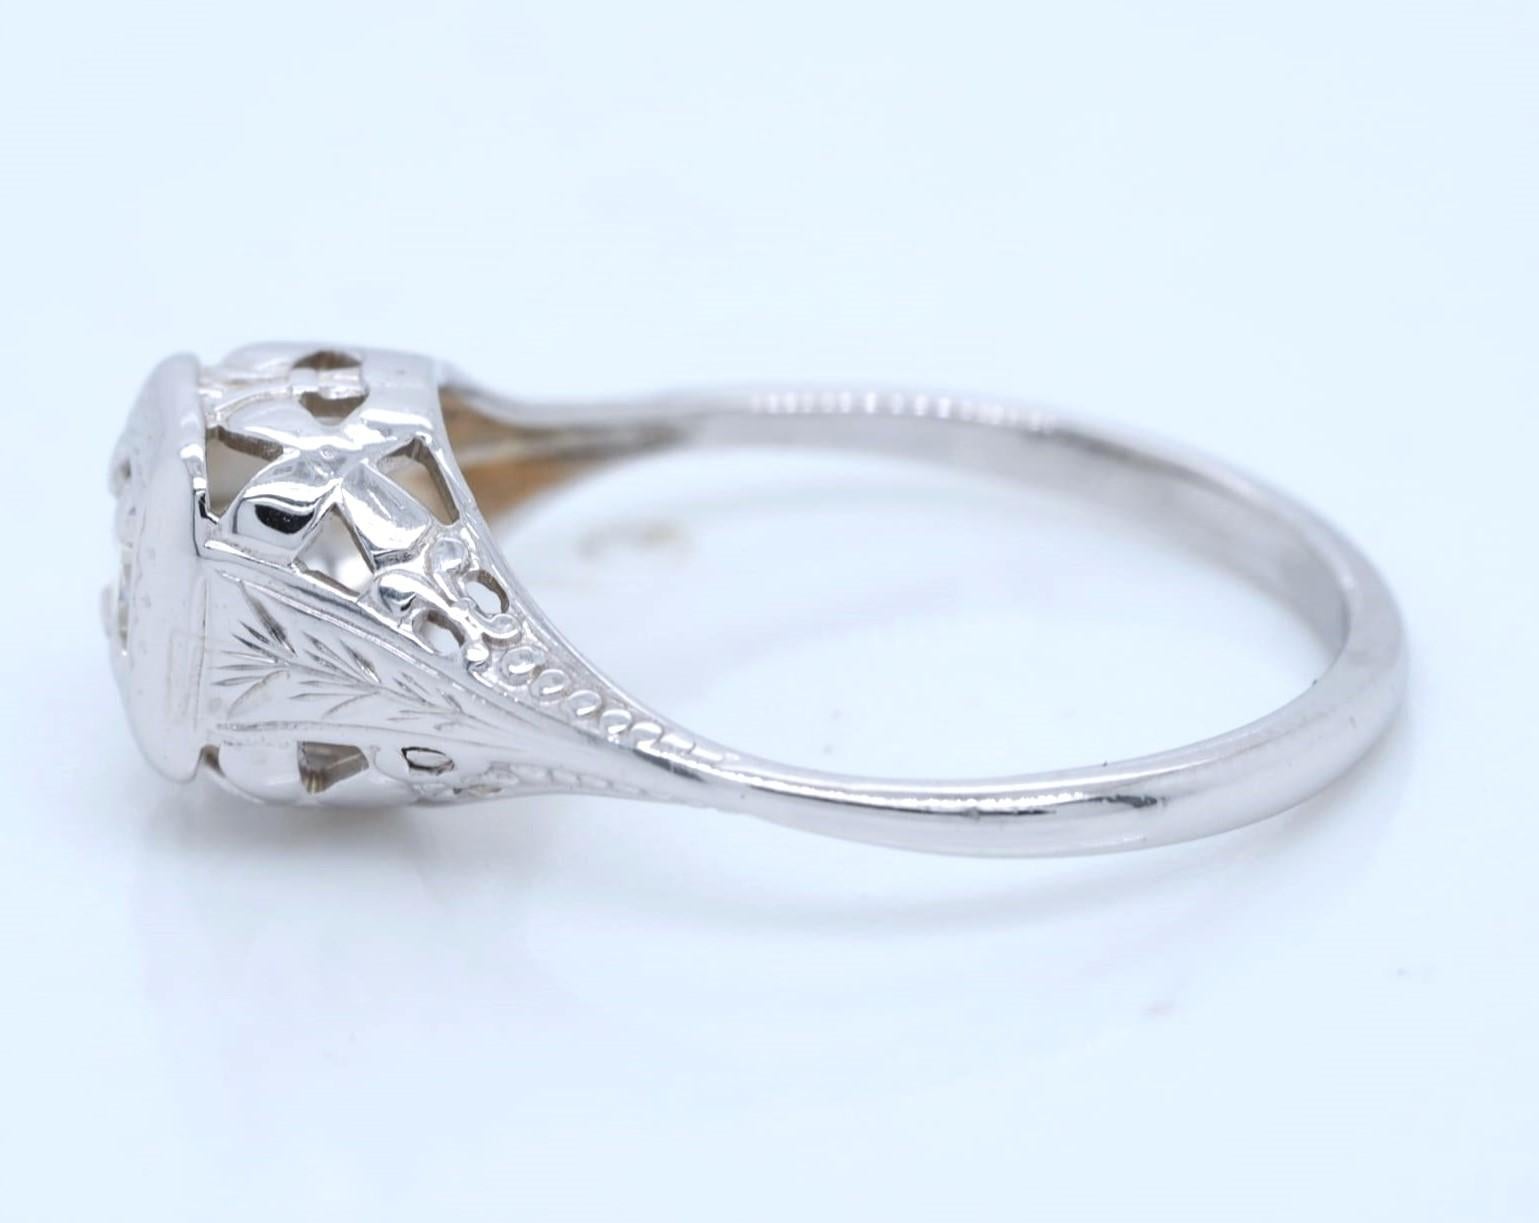 Vintage 14K White Gold 0.25 ct Round Cut Diamond Engagement Ring In Good Condition For Sale In Addison, TX